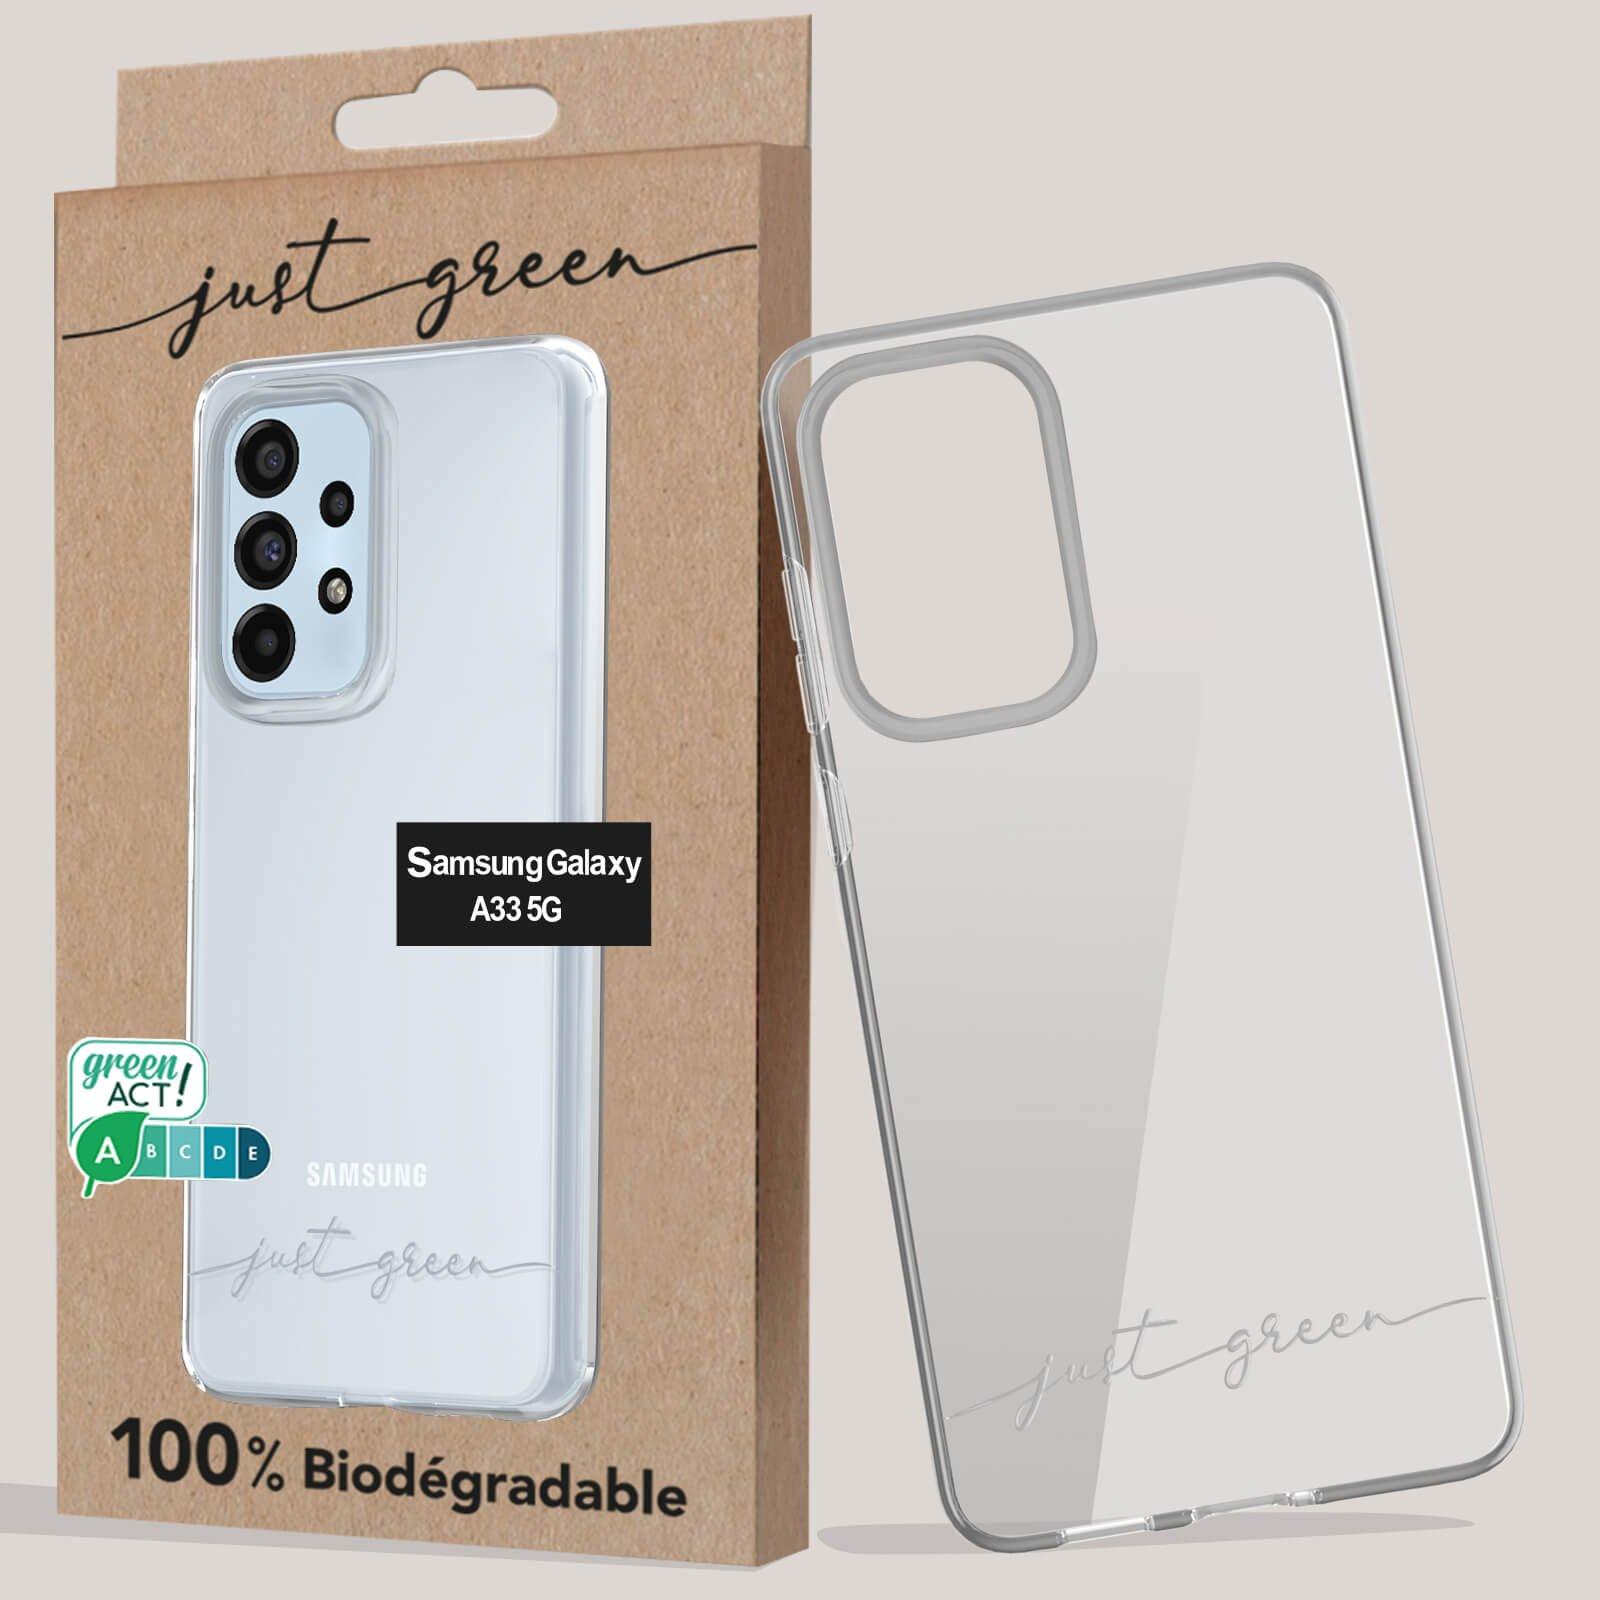 Just green  Coque Samsung A53 Recyclable 